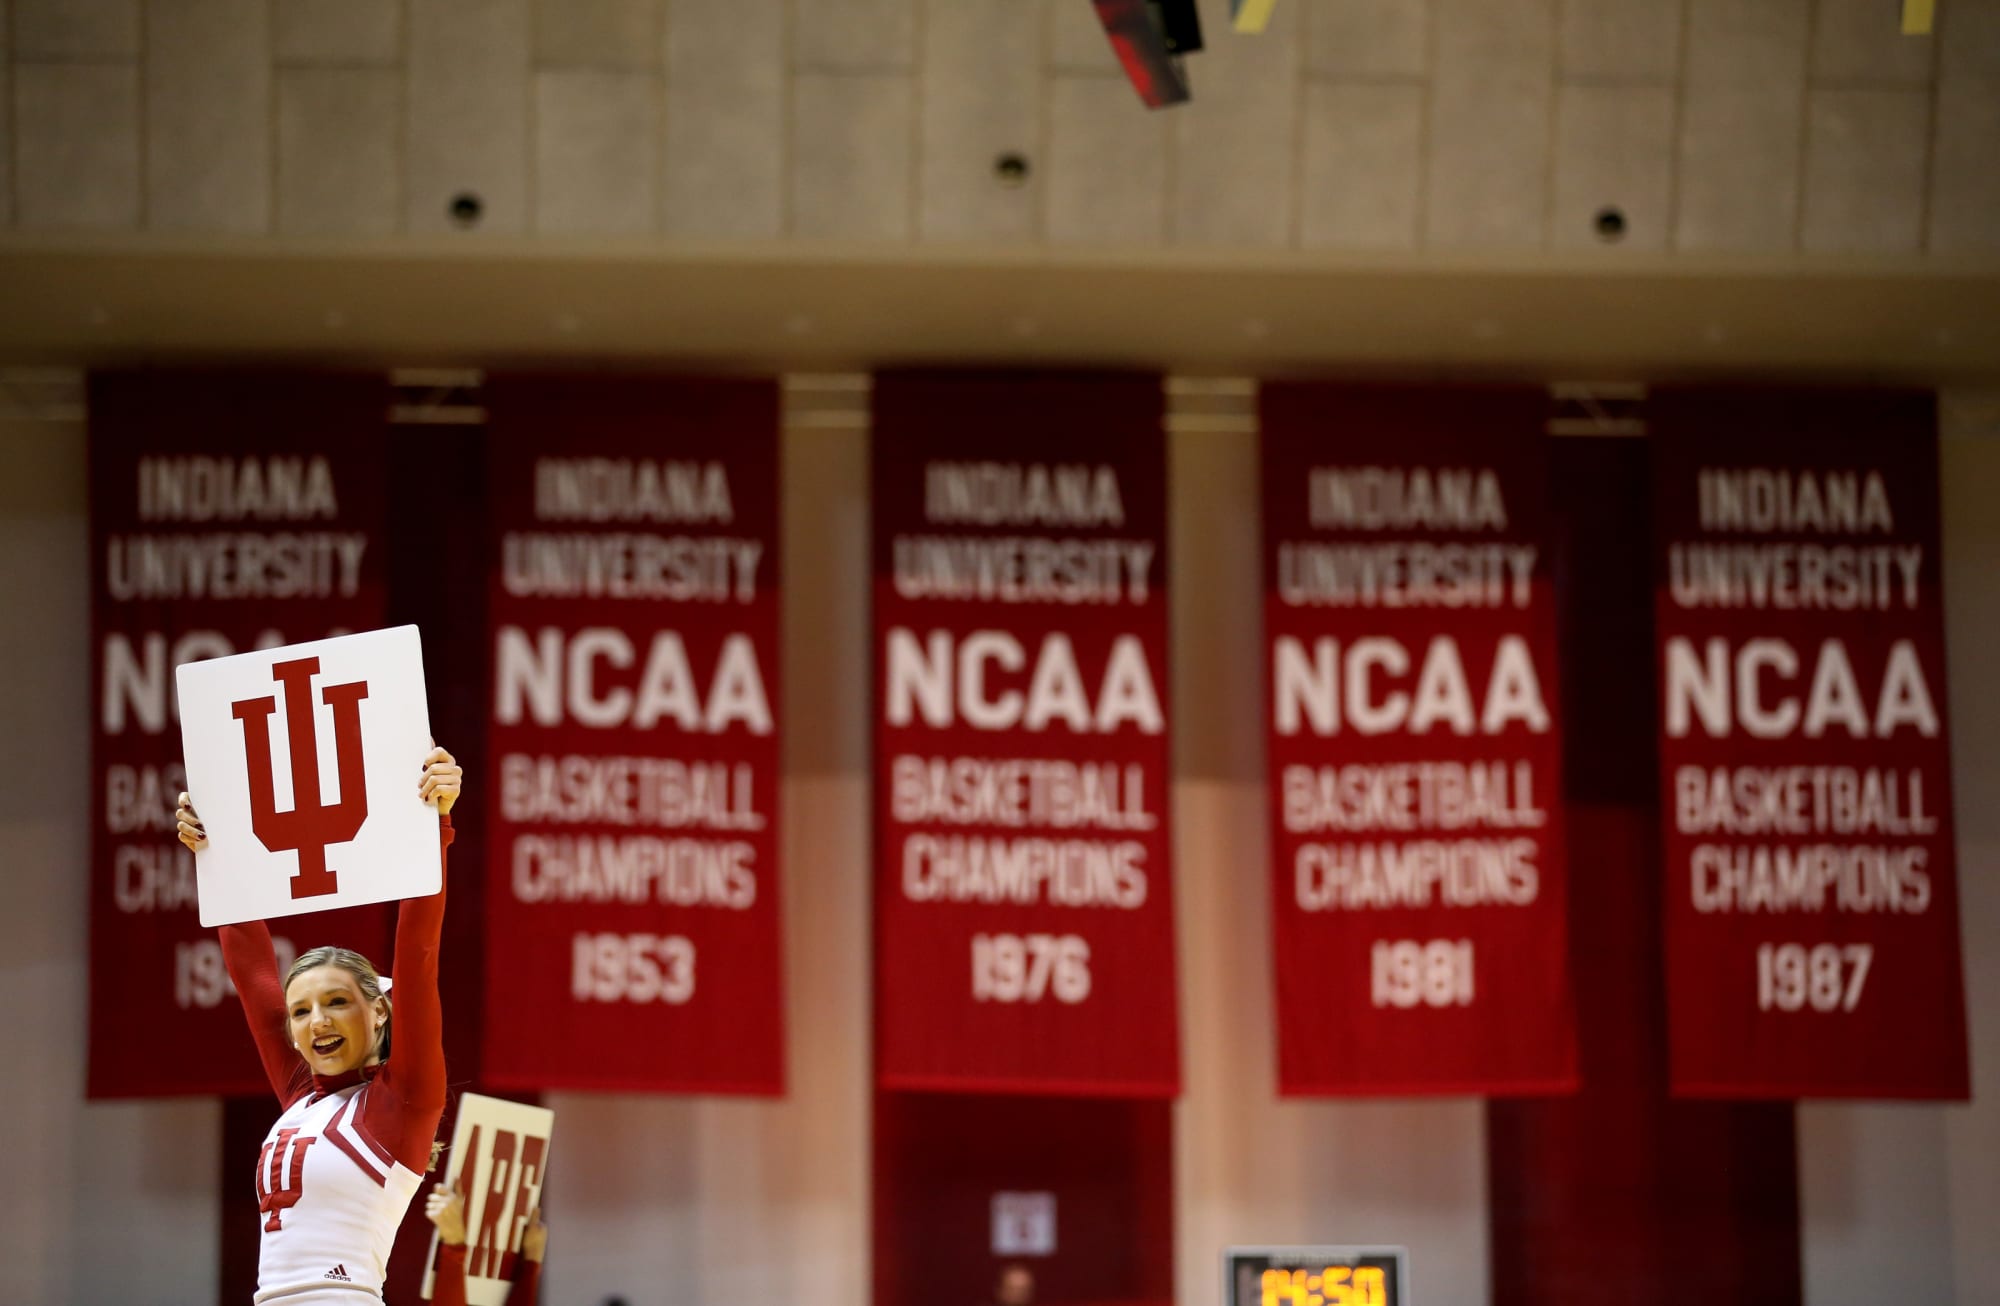 Indiana Basketball Hoosiers To Look At Juco To Round Out The 2019 Class